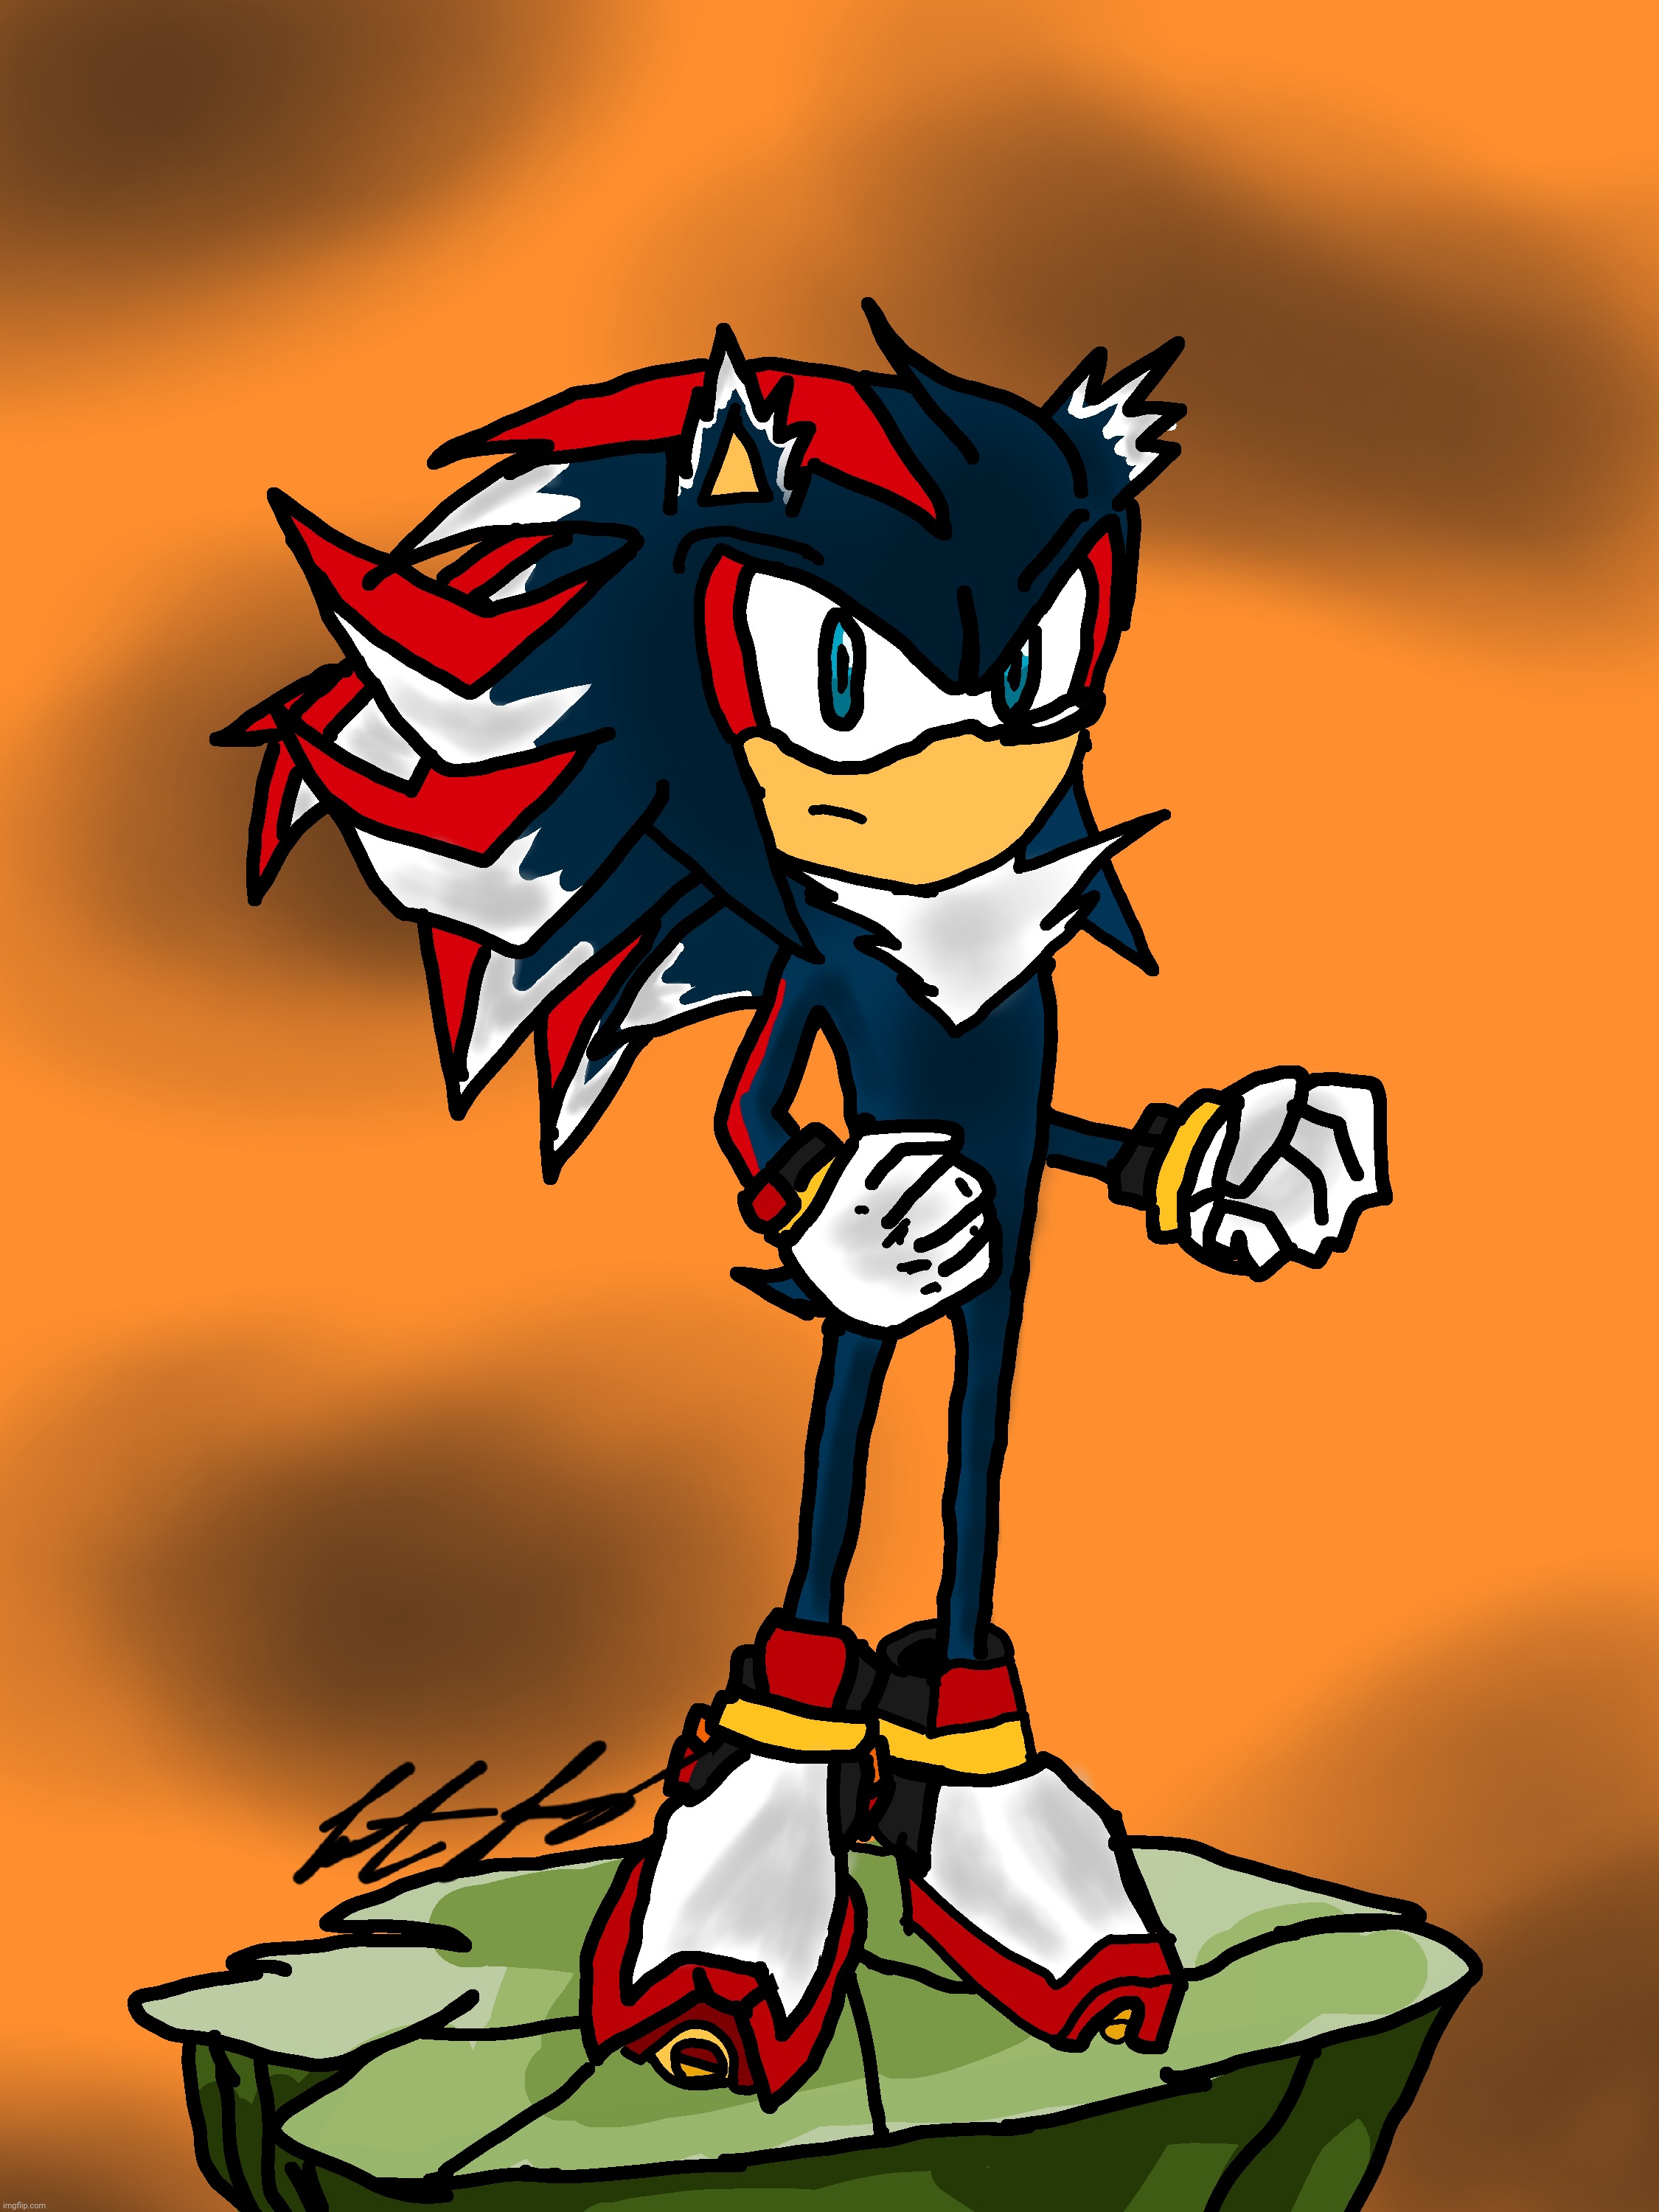 Super Shadow 4 | image tagged in shadow the hedgehog,sonic,digital art,drawing | made w/ Imgflip meme maker